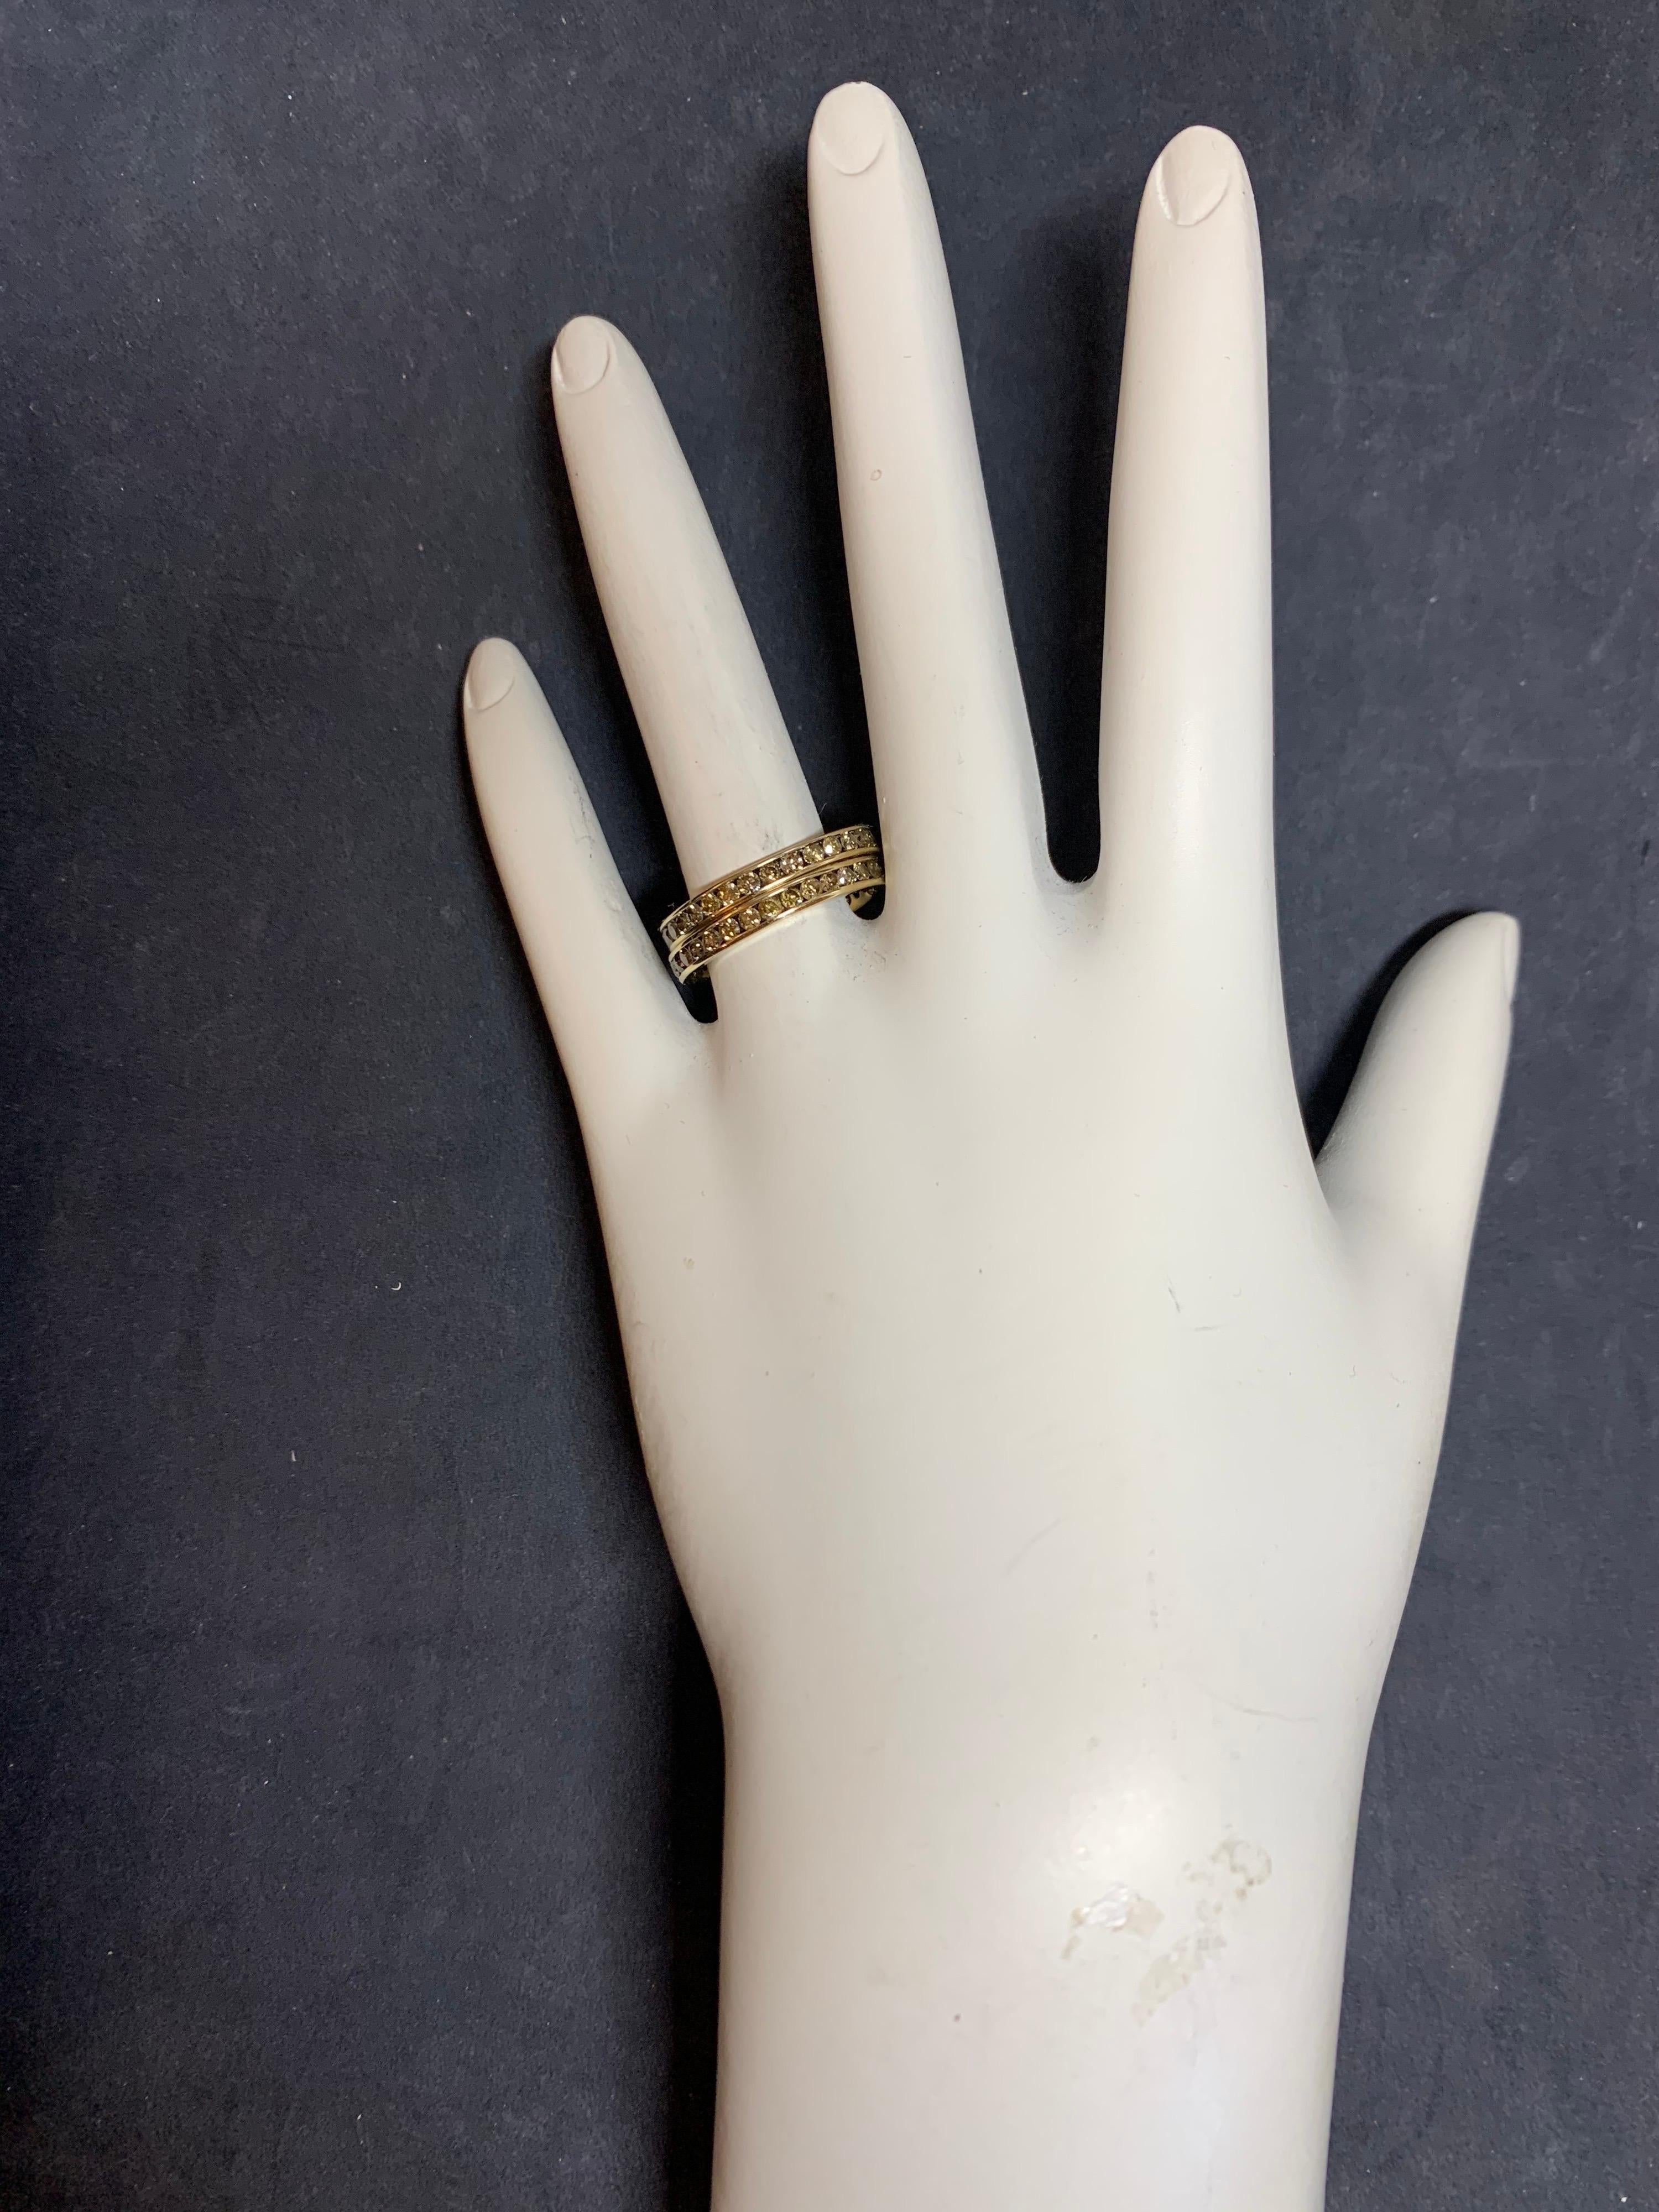 Modern Yellow Gold Matching Band Set. 

Each band is set with 32 Natural Champaign Diamonds weighing 1.13 carats each, 2.25 Carats Total. Weights are approximate. 

Ring size is 6.75++, weight is 1.7 grams each (3.4 grams total). Width is 2.6mm.